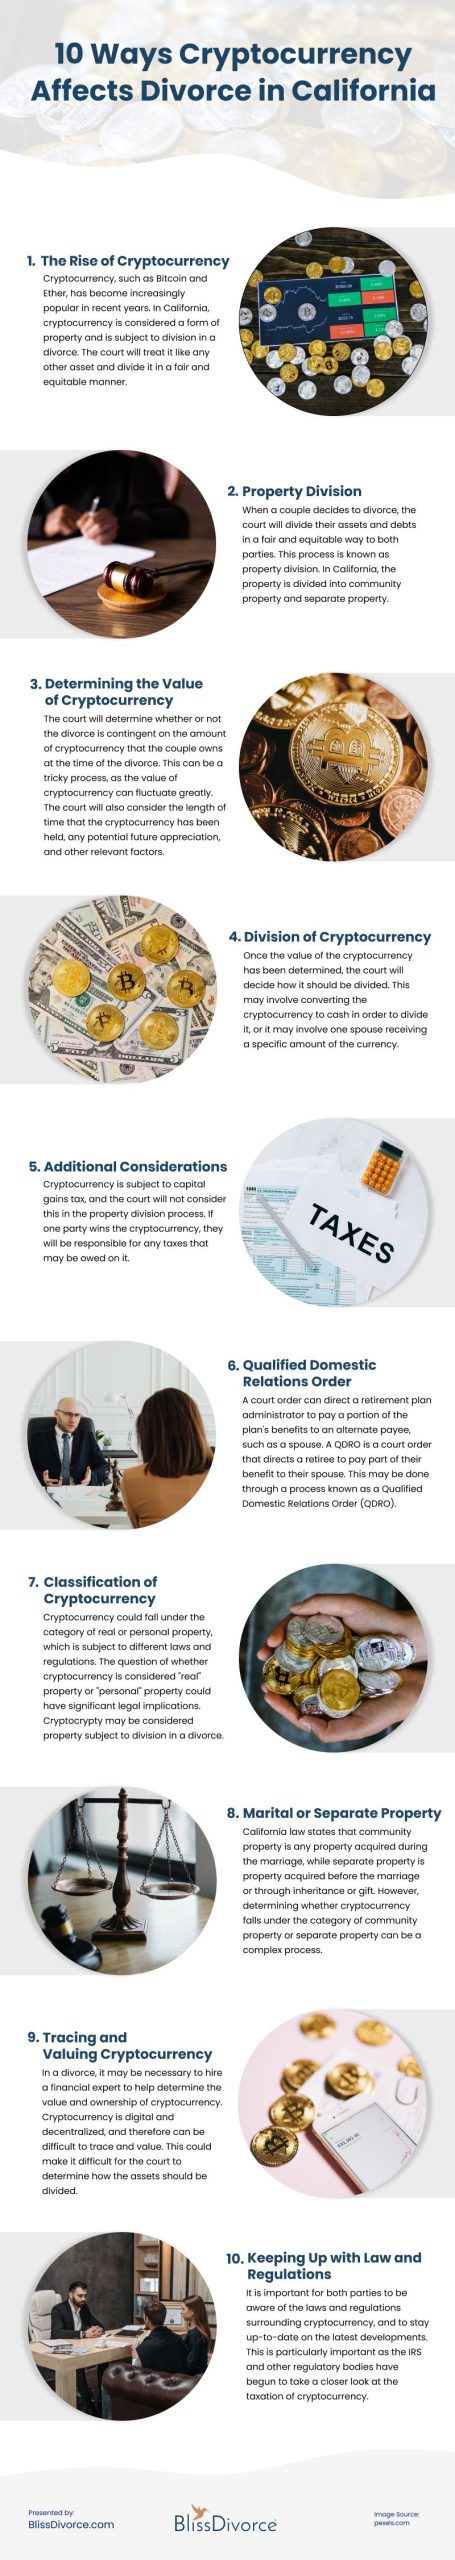 10 Ways Cryptocurrency Affects Divorce in California Infographic